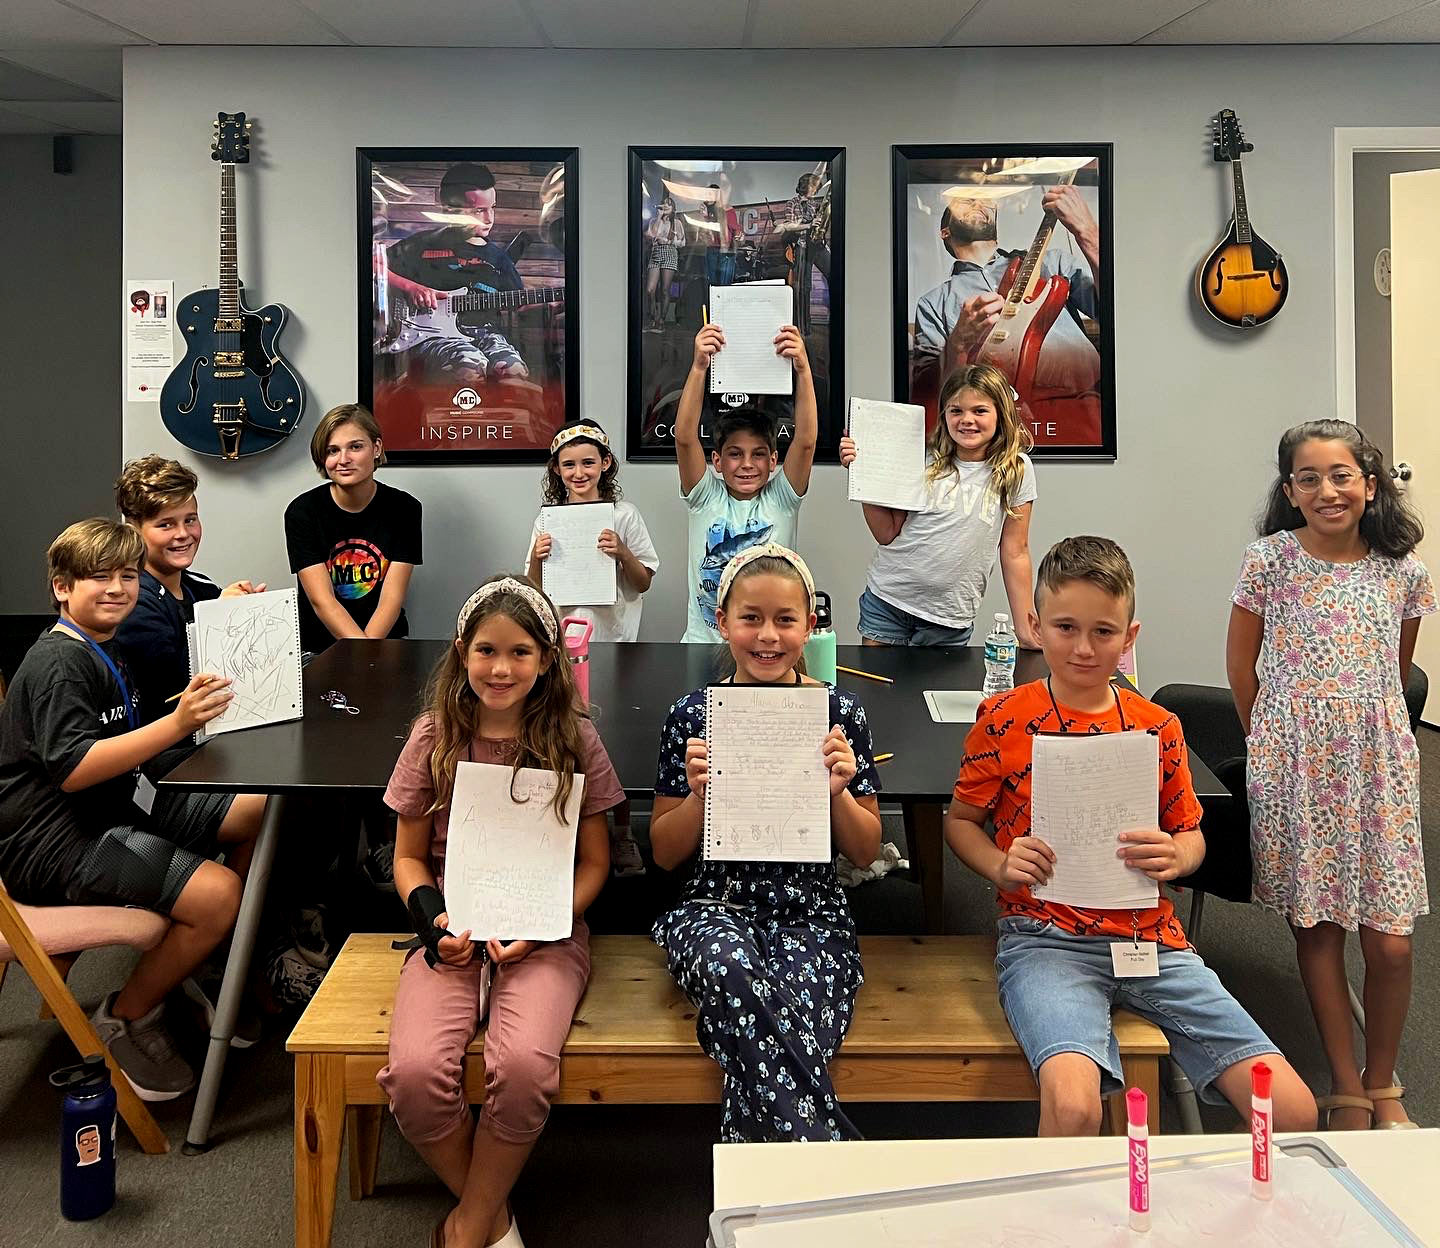 Music Compound hosts writing workshops with young local author